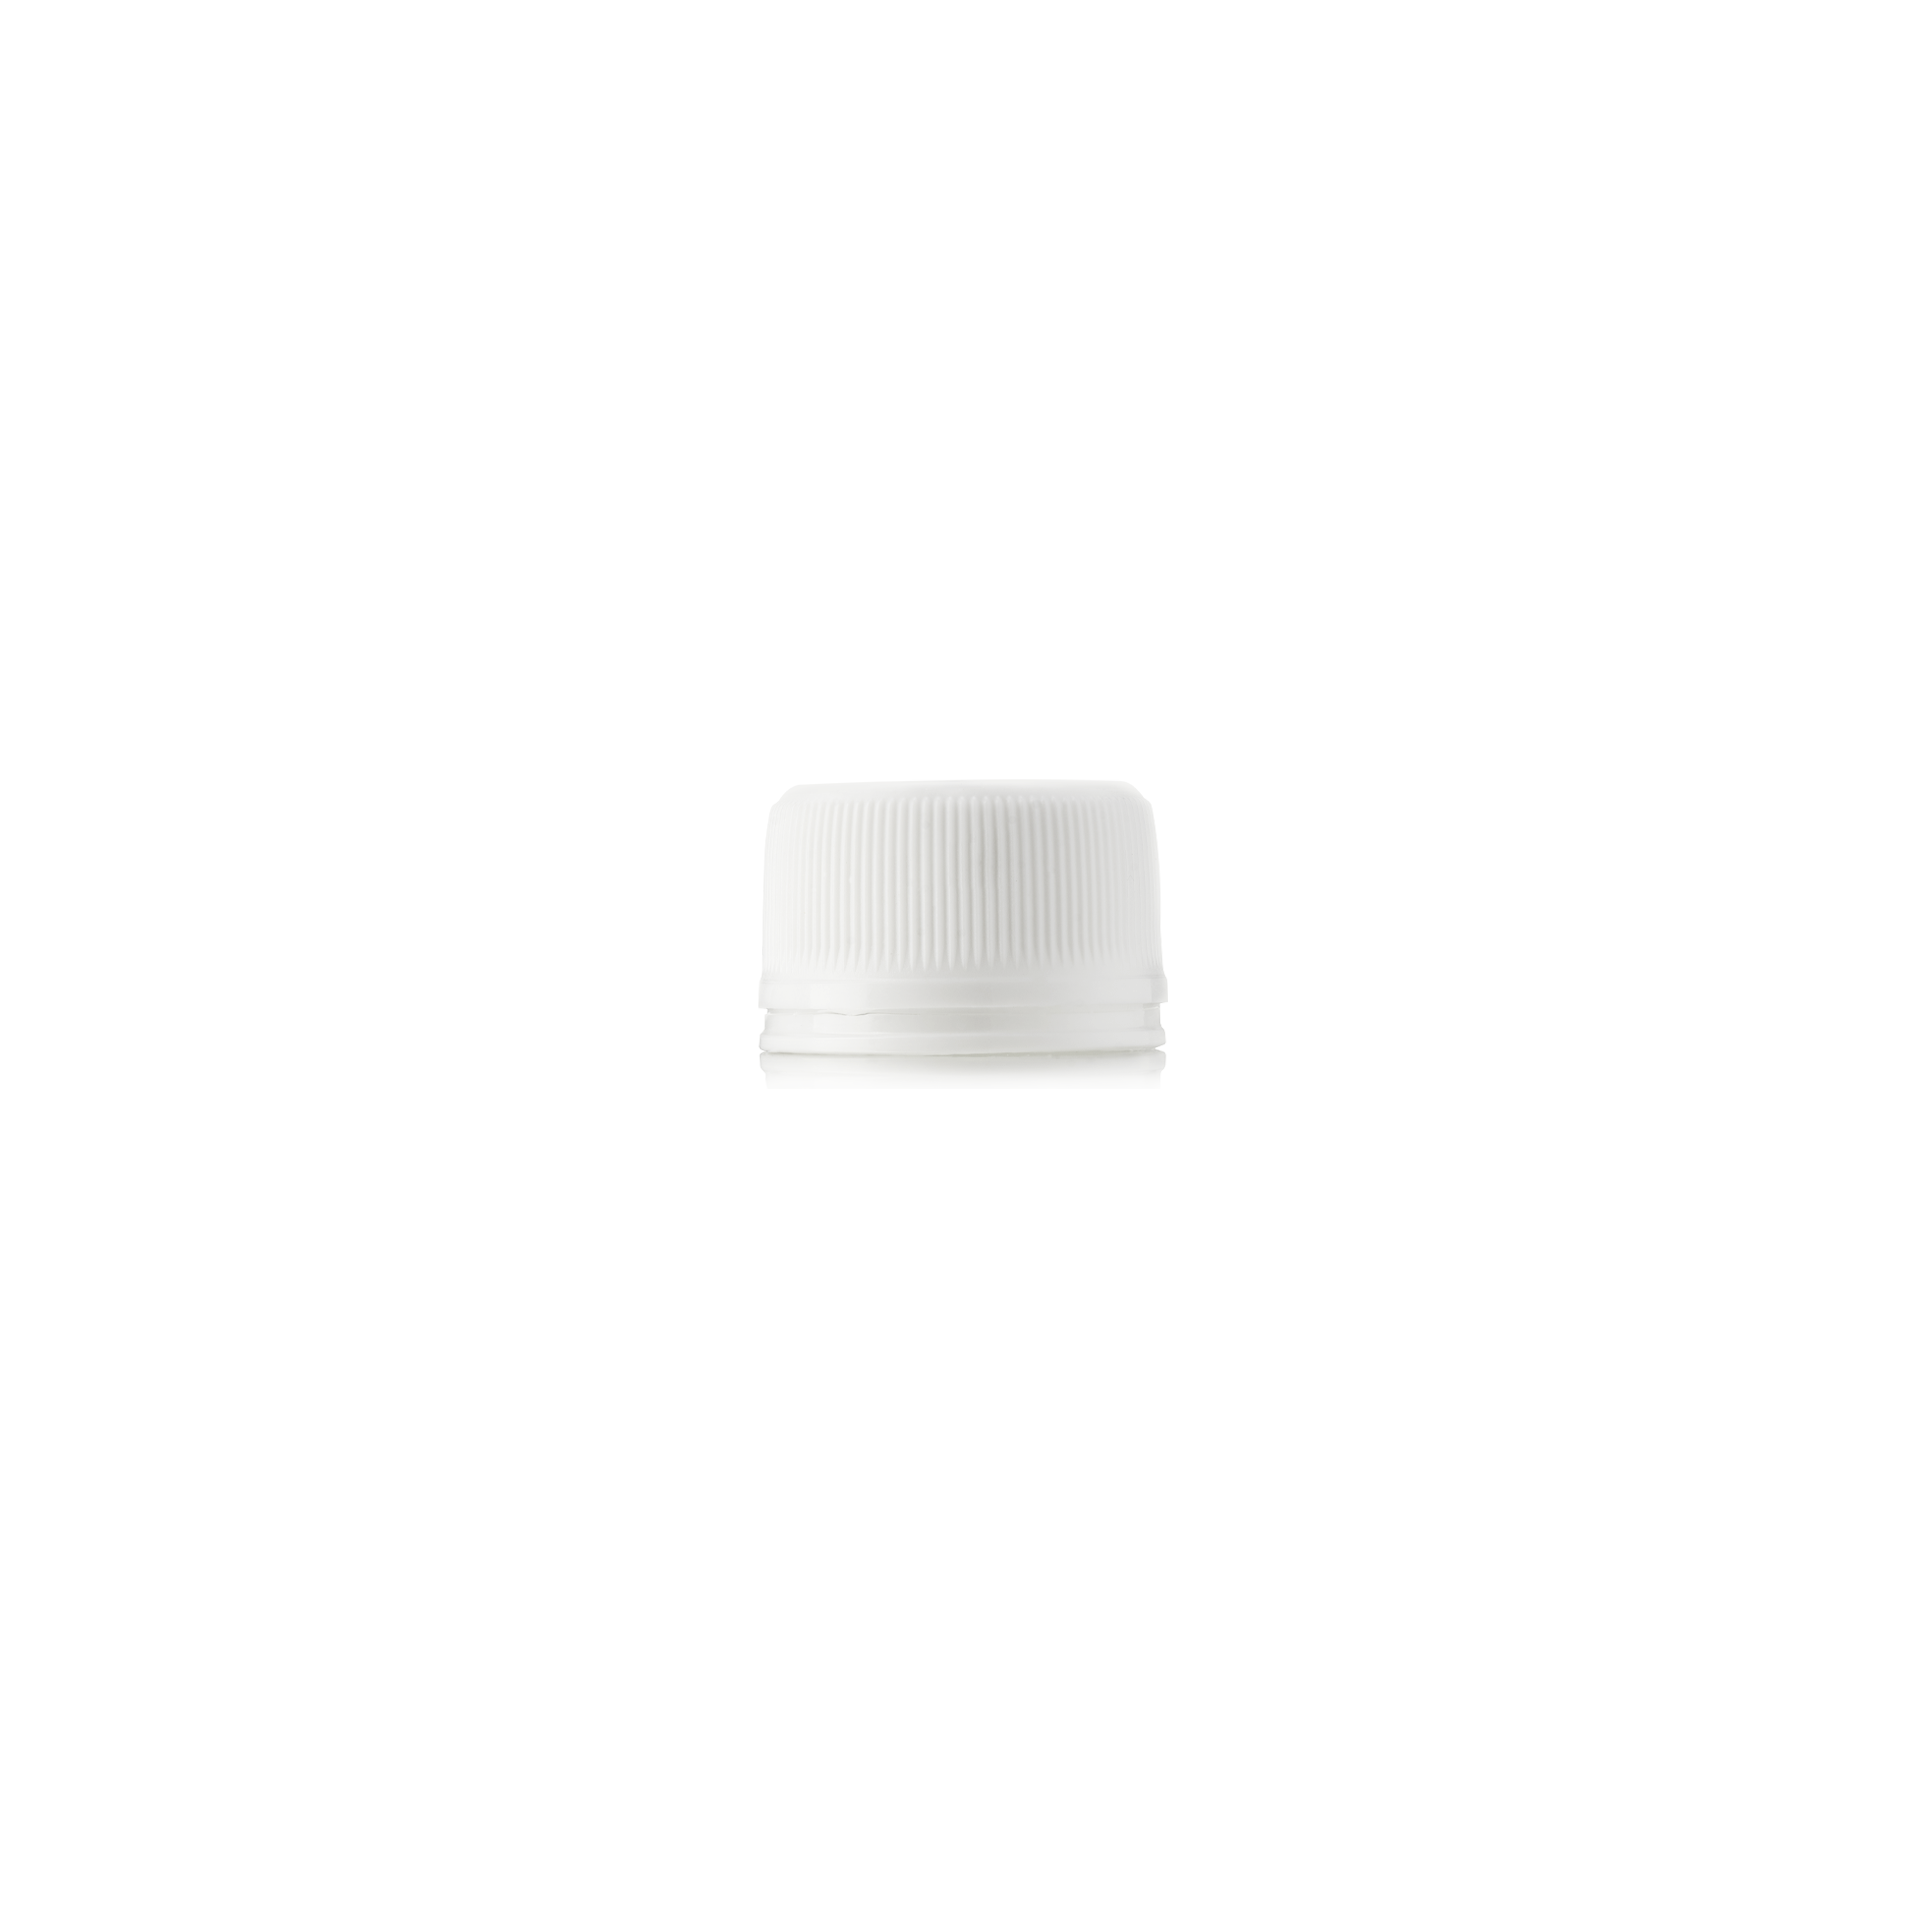 Screw cap standard PP28, HDPE, white, fine ribbed, white inlay 